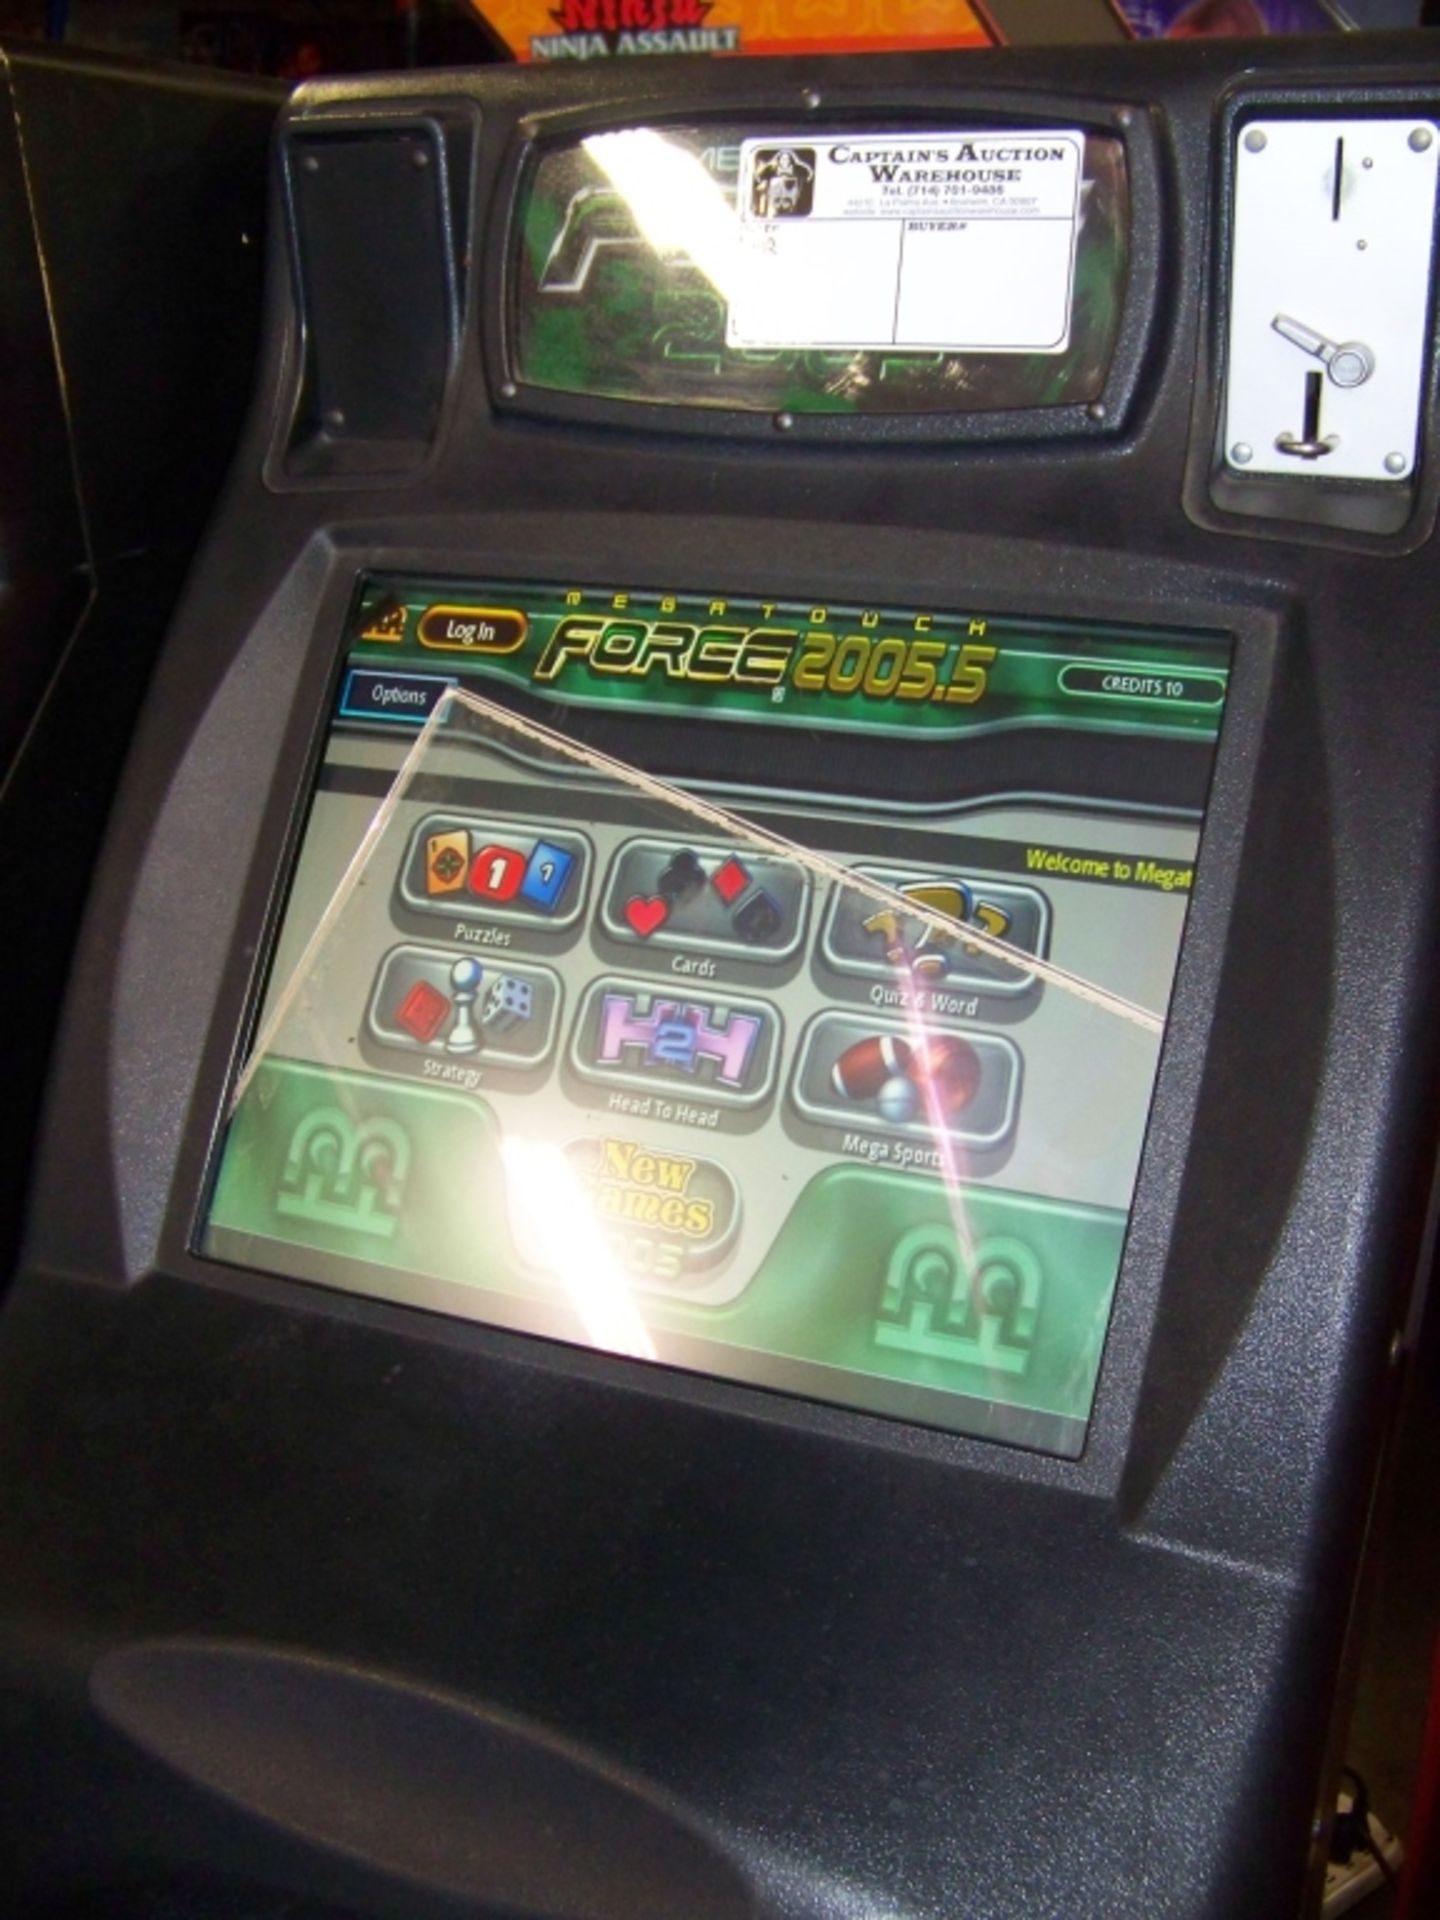 MEGATOUCH FORCE 2005.5 UPRIGHT TOUCH SCREEN ARCADE - Image 3 of 3